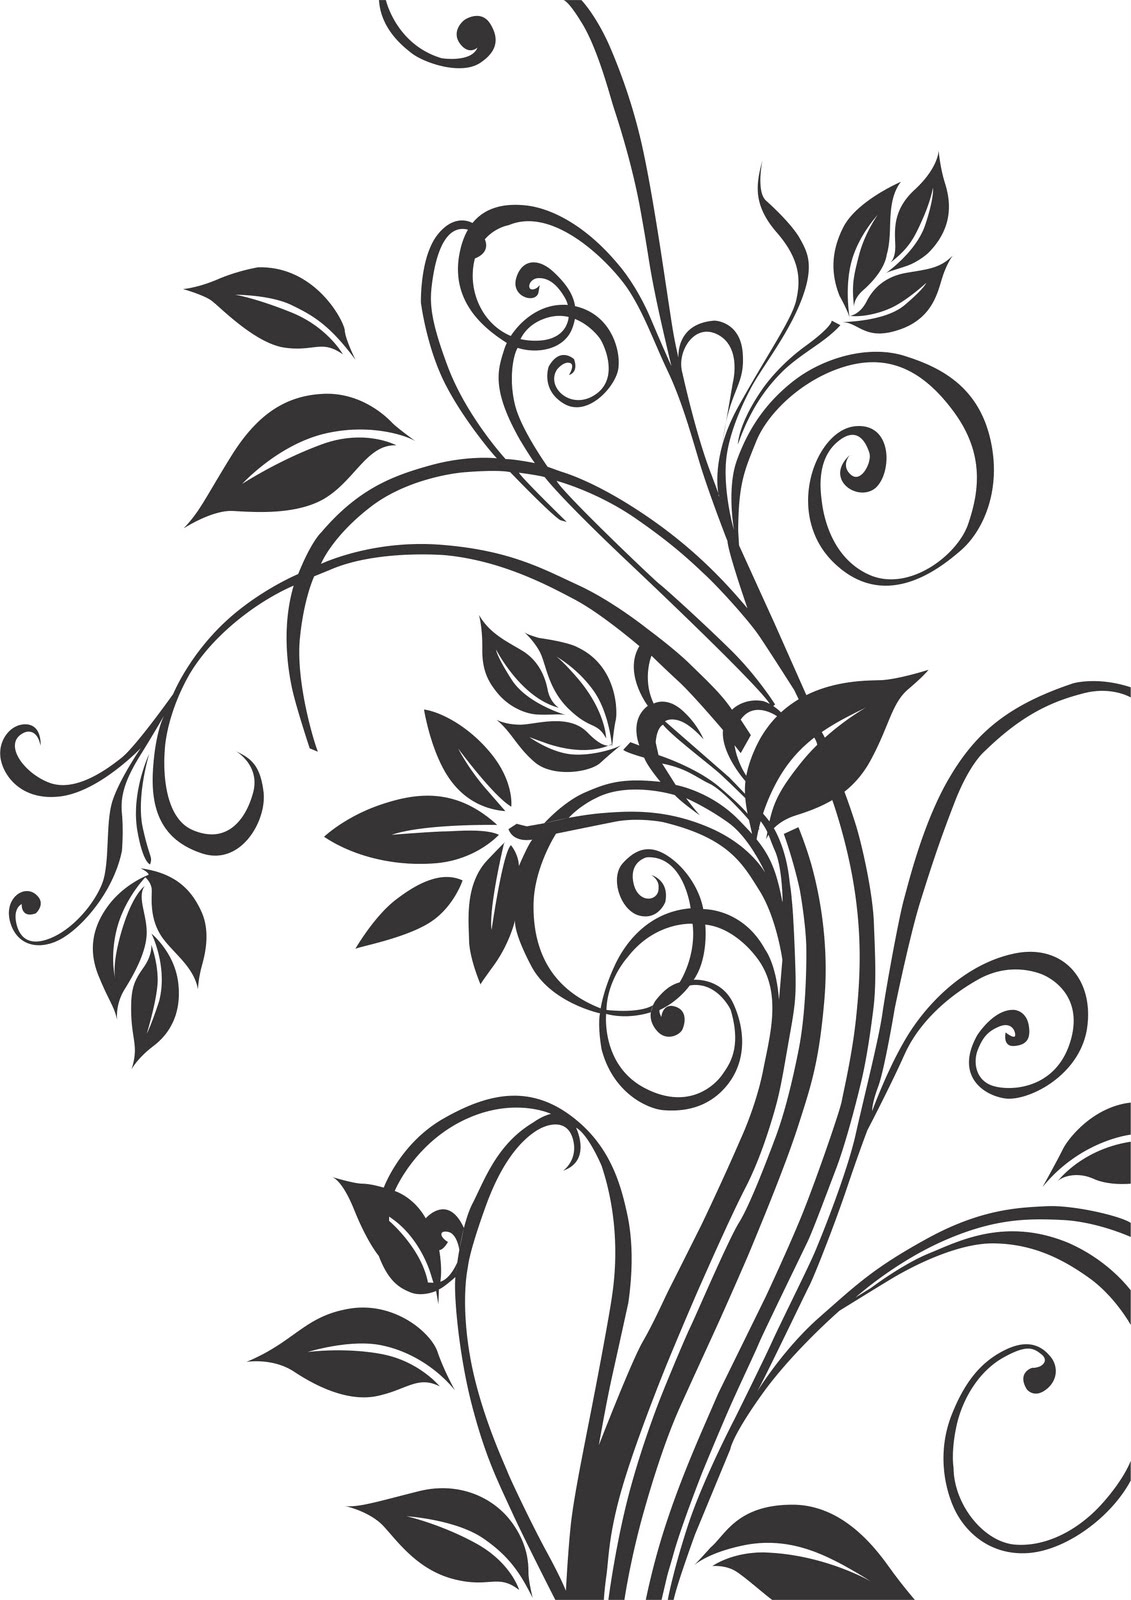 vector free download black and white - photo #14